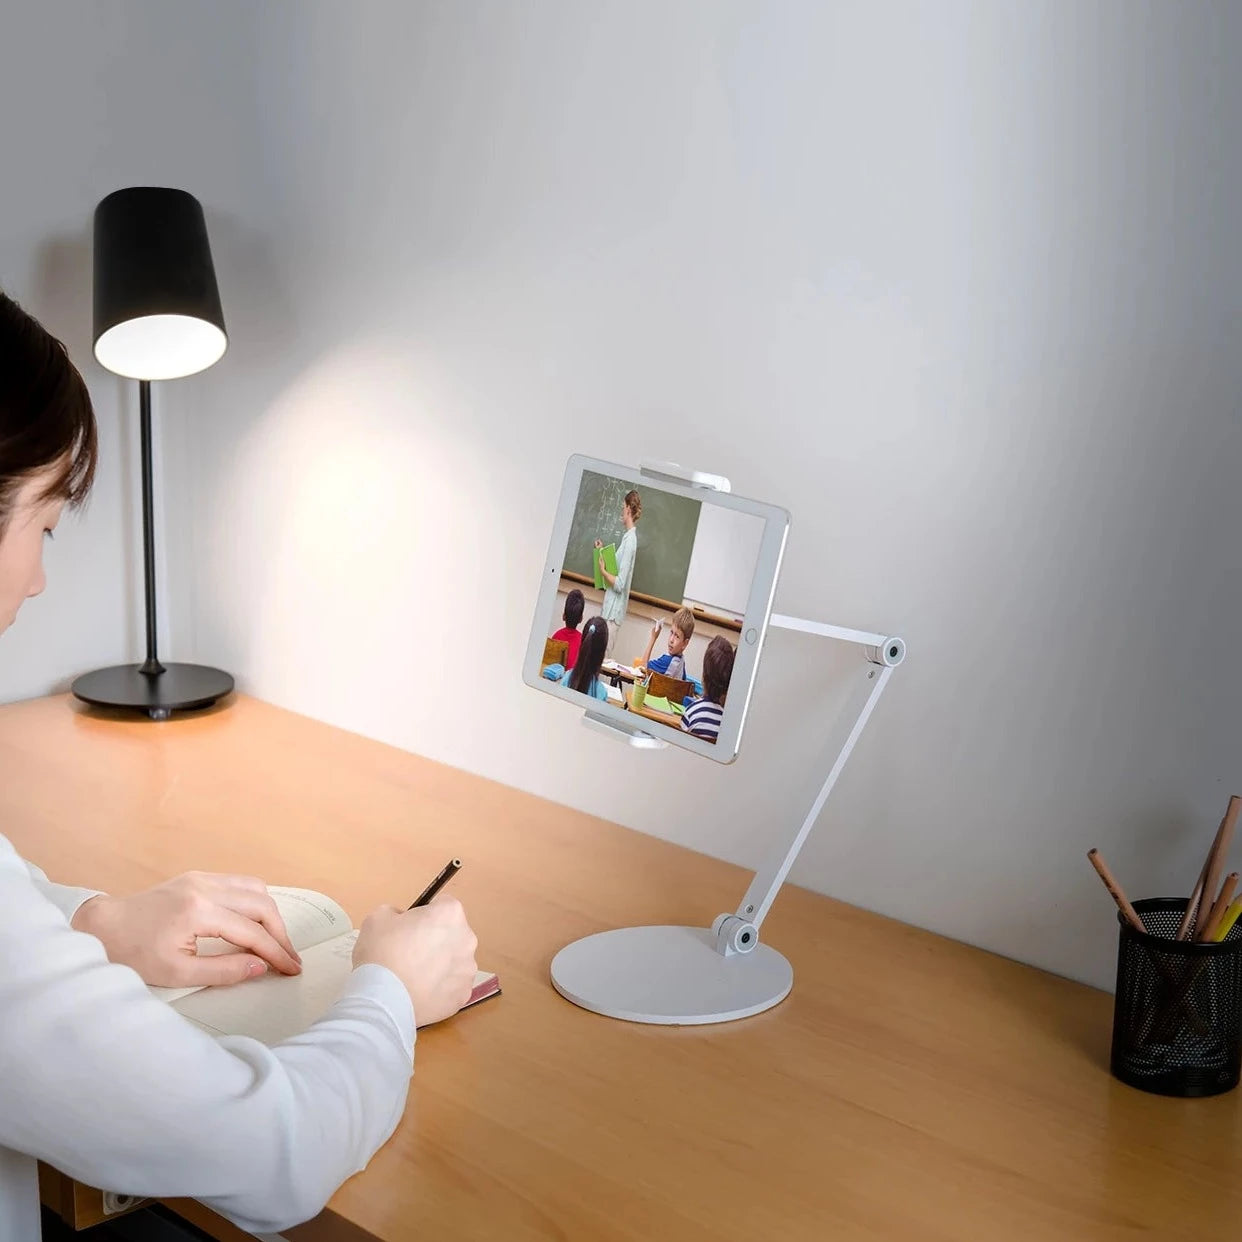 Adjustable Tablet Stand White